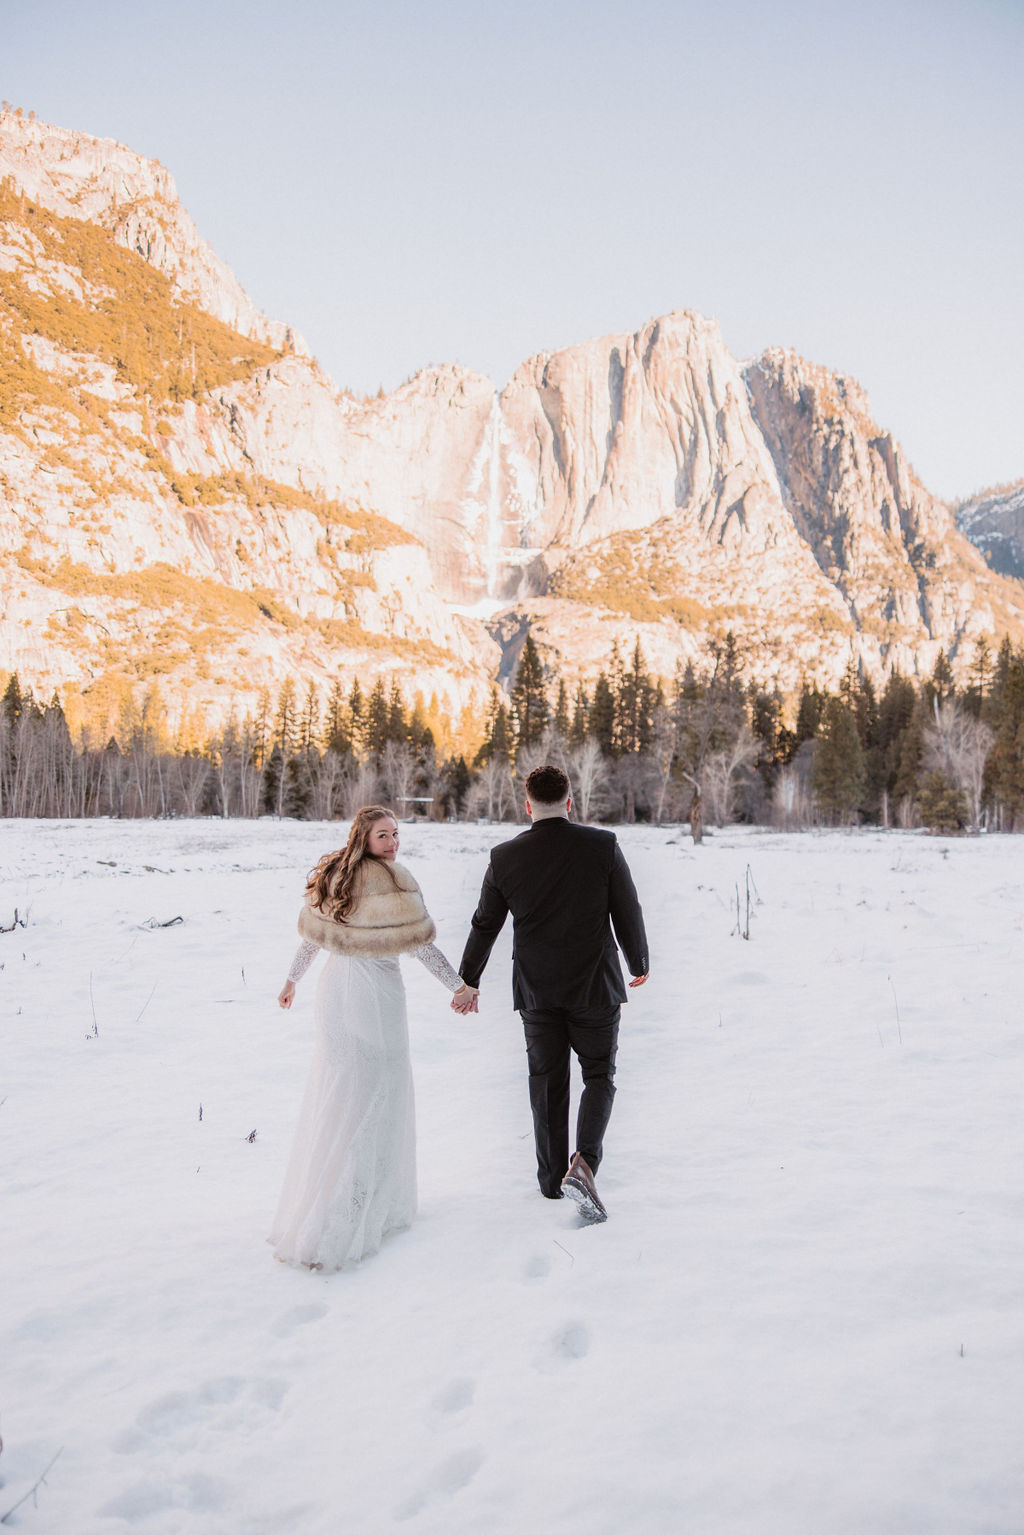 A couple in wedding attire sharing a playful moment and holding hands in a snowy landscape with a mountain in the background.